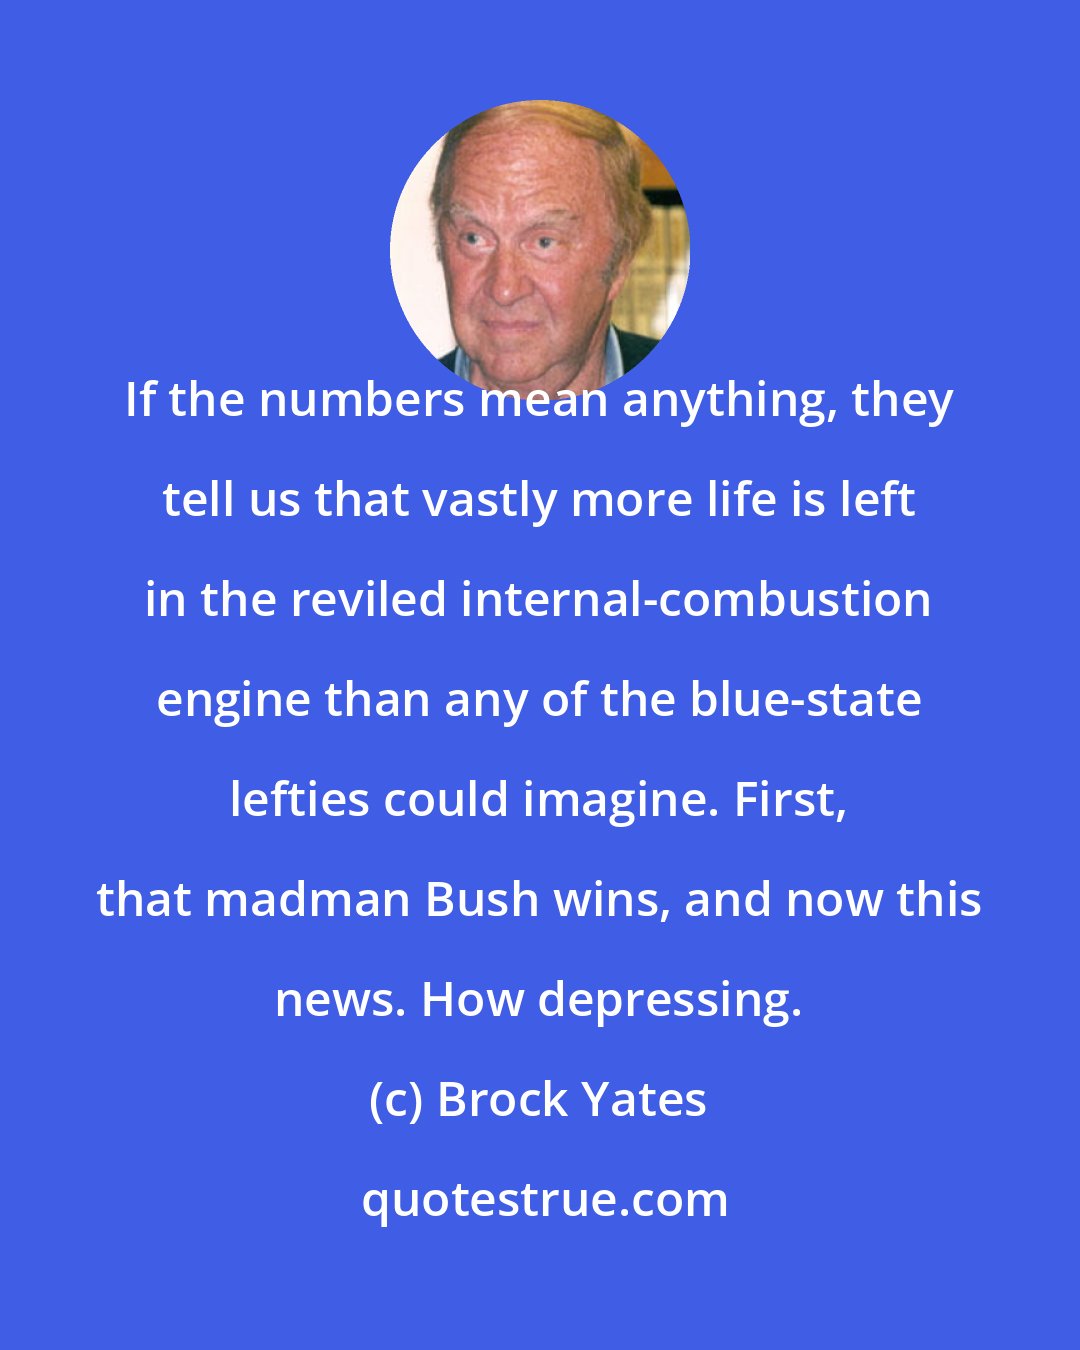 Brock Yates: If the numbers mean anything, they tell us that vastly more life is left in the reviled internal-combustion engine than any of the blue-state lefties could imagine. First, that madman Bush wins, and now this news. How depressing.